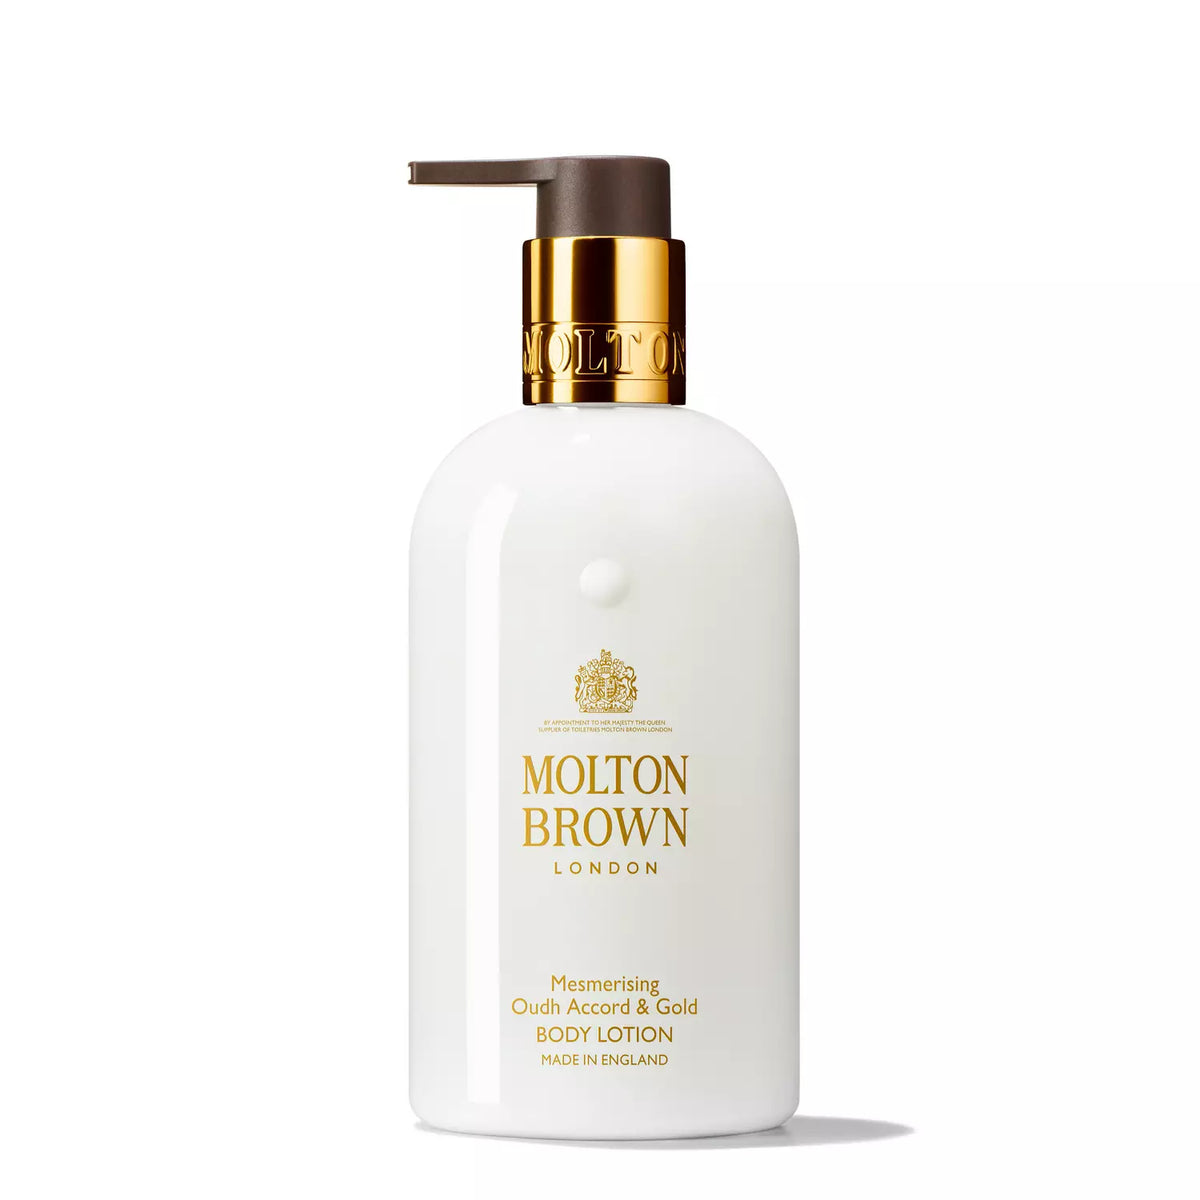 Mesmerising Oudh Accord &amp; Gold Body Lotion